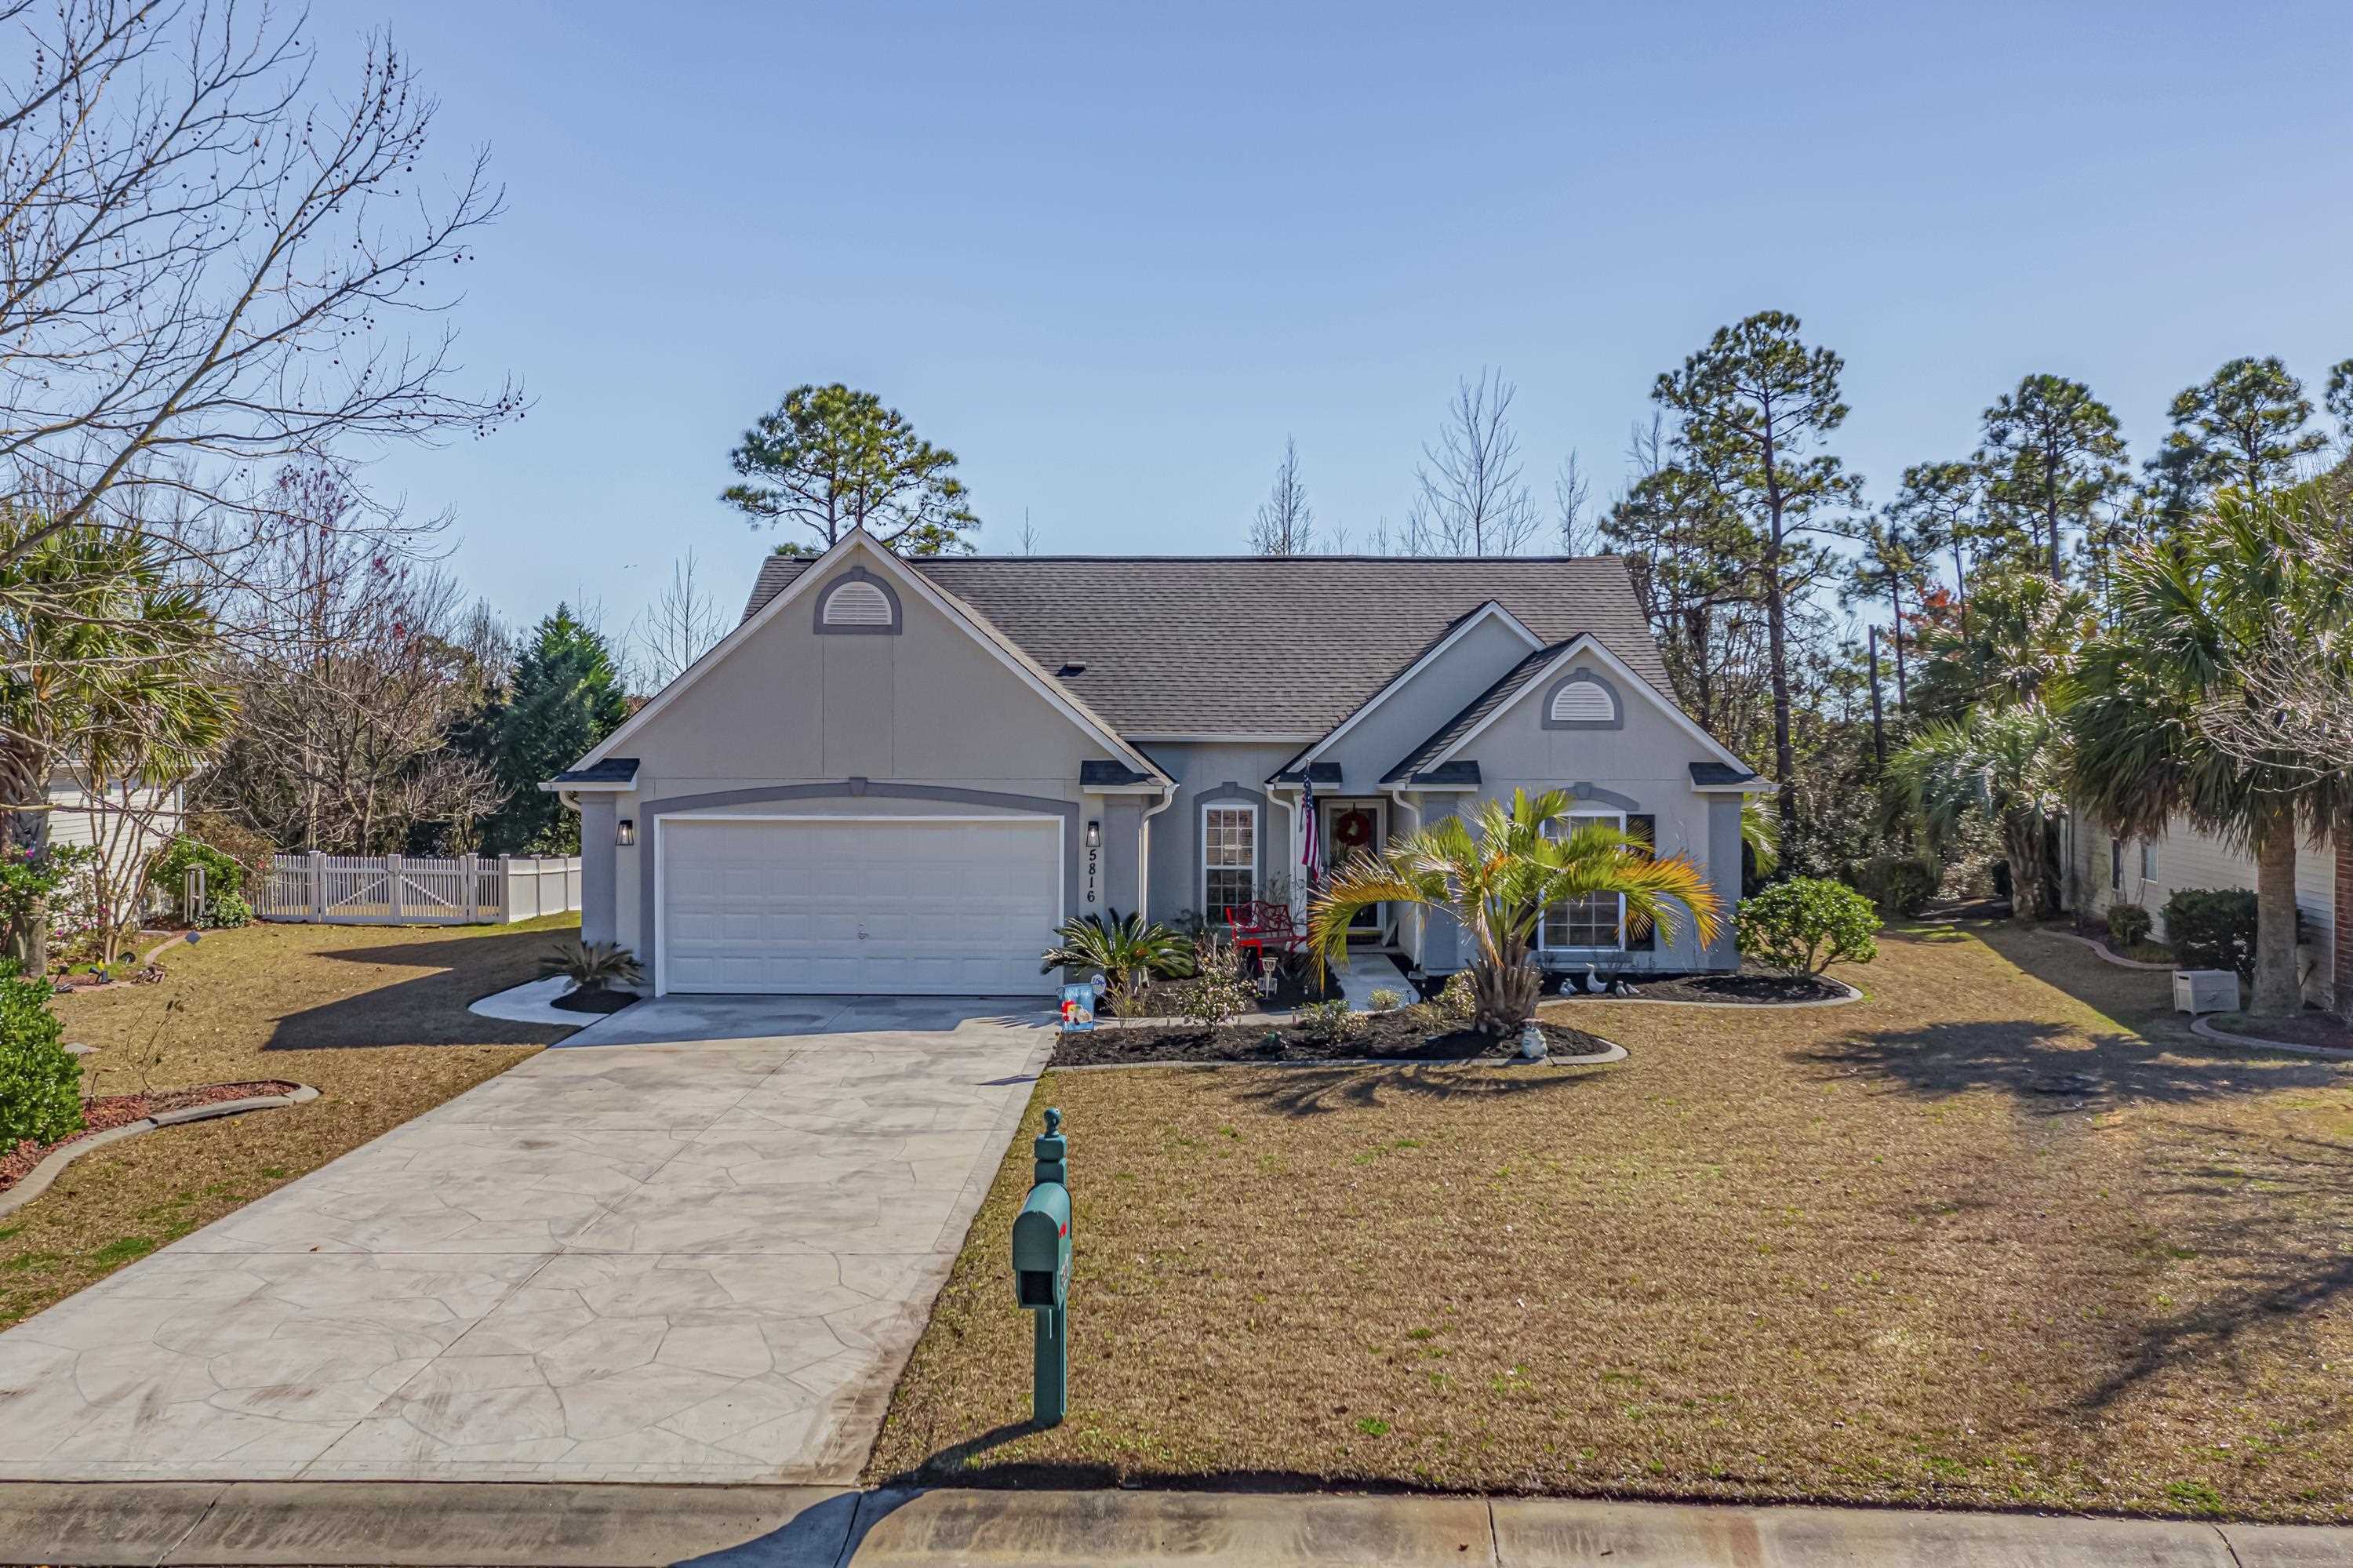 5816 Mossy Oaks Dr. North Myrtle Beach, SC 29582